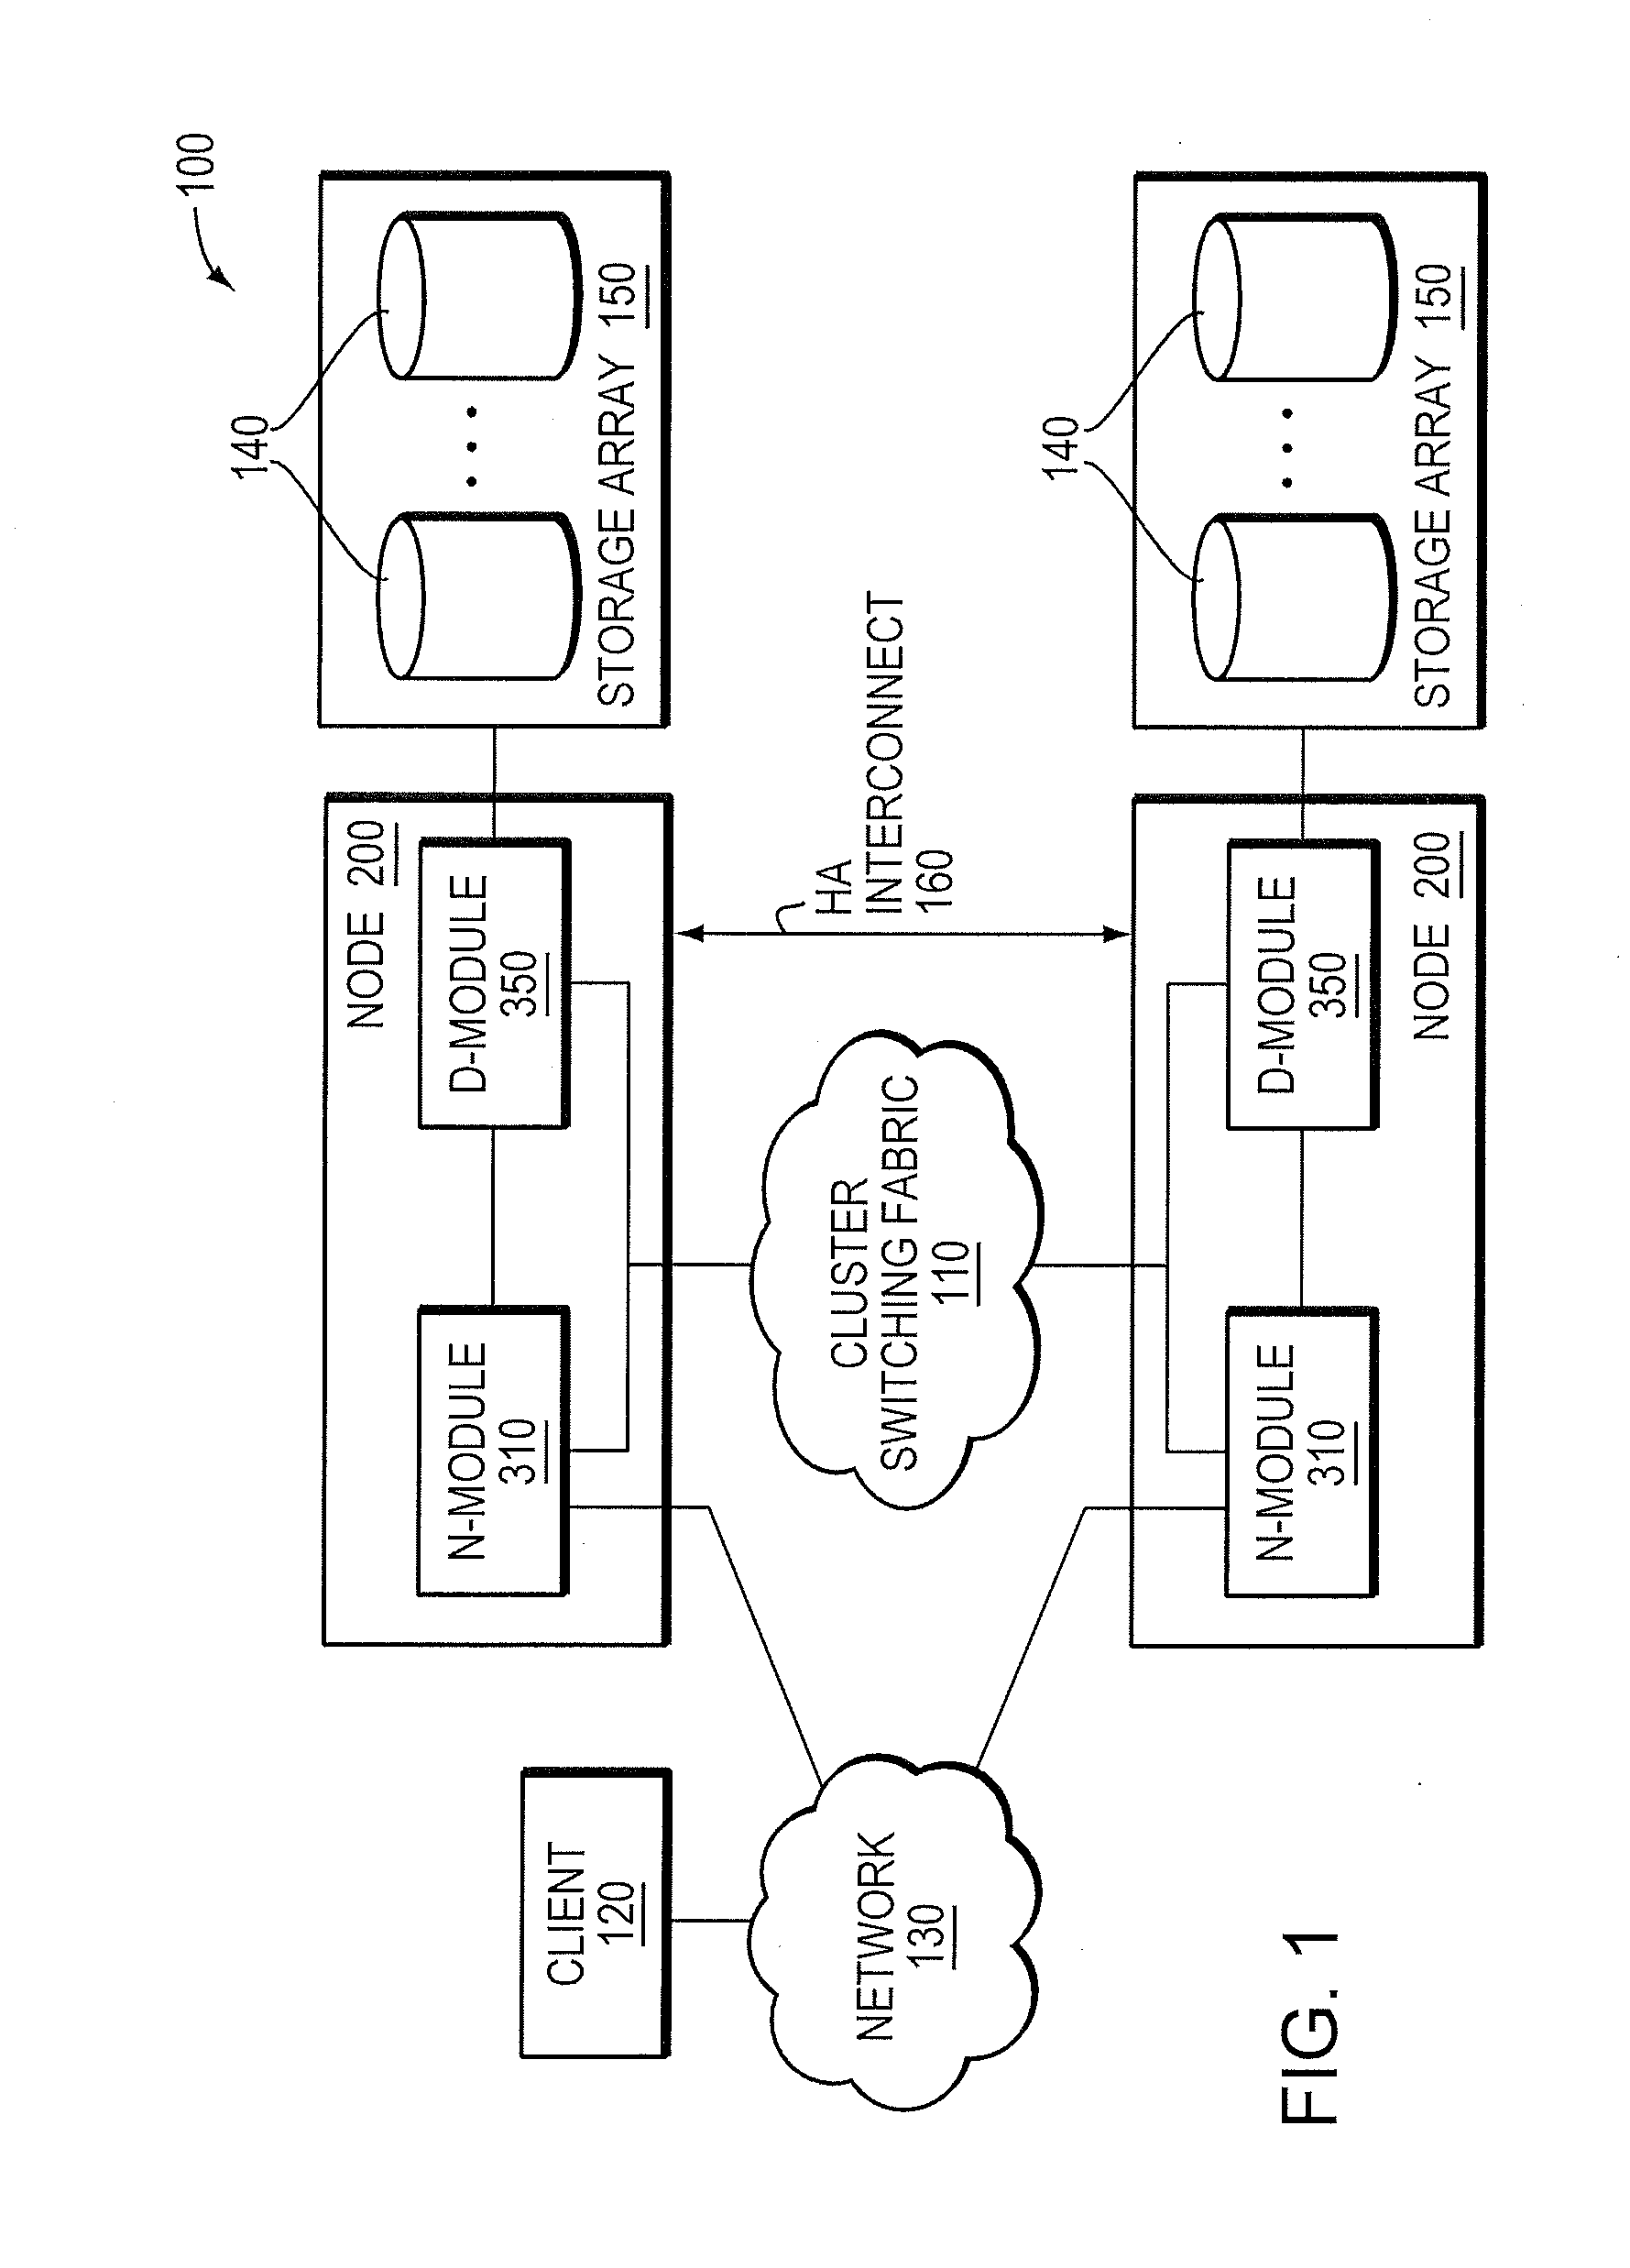 Distributed control protocol for high availability in multi-node storage cluster